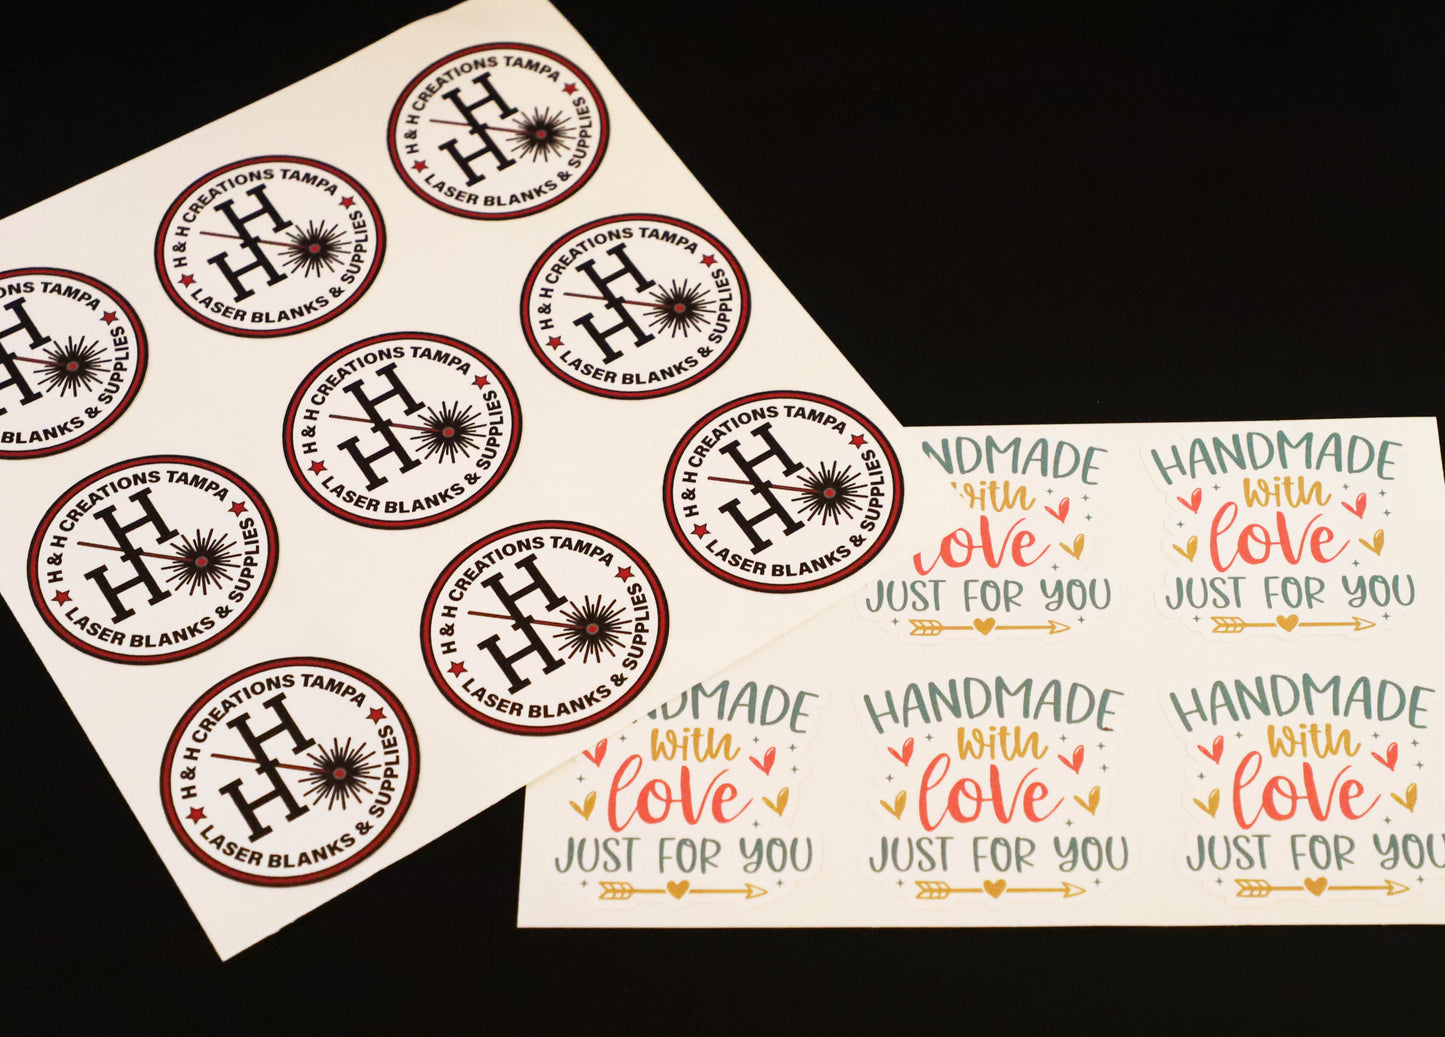 Custom Vinyl Business Sheet Stickers - Round/Circle Product Labels